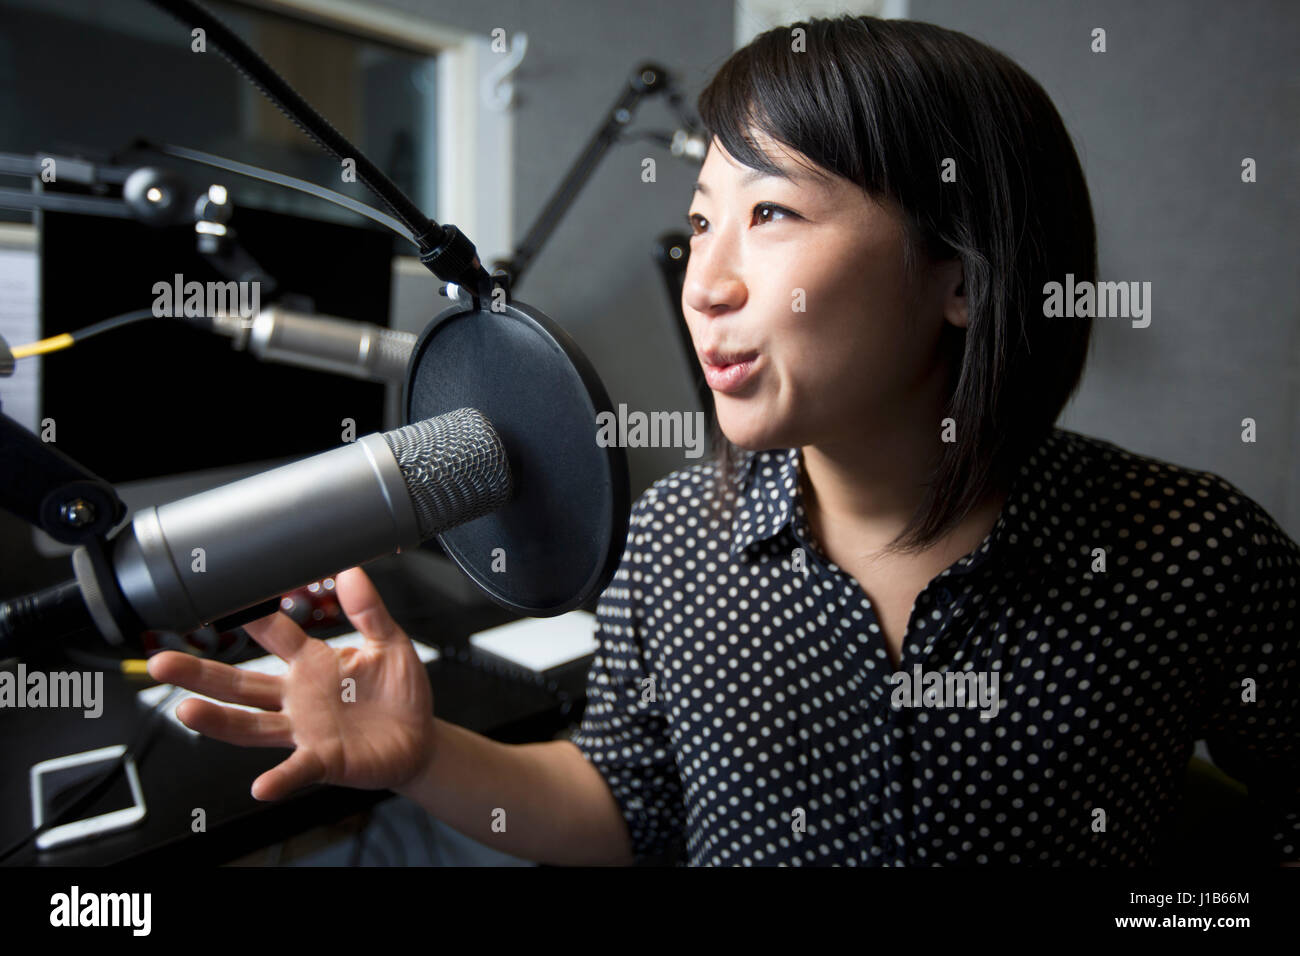 Asian woman talking into microphone Stock Photo